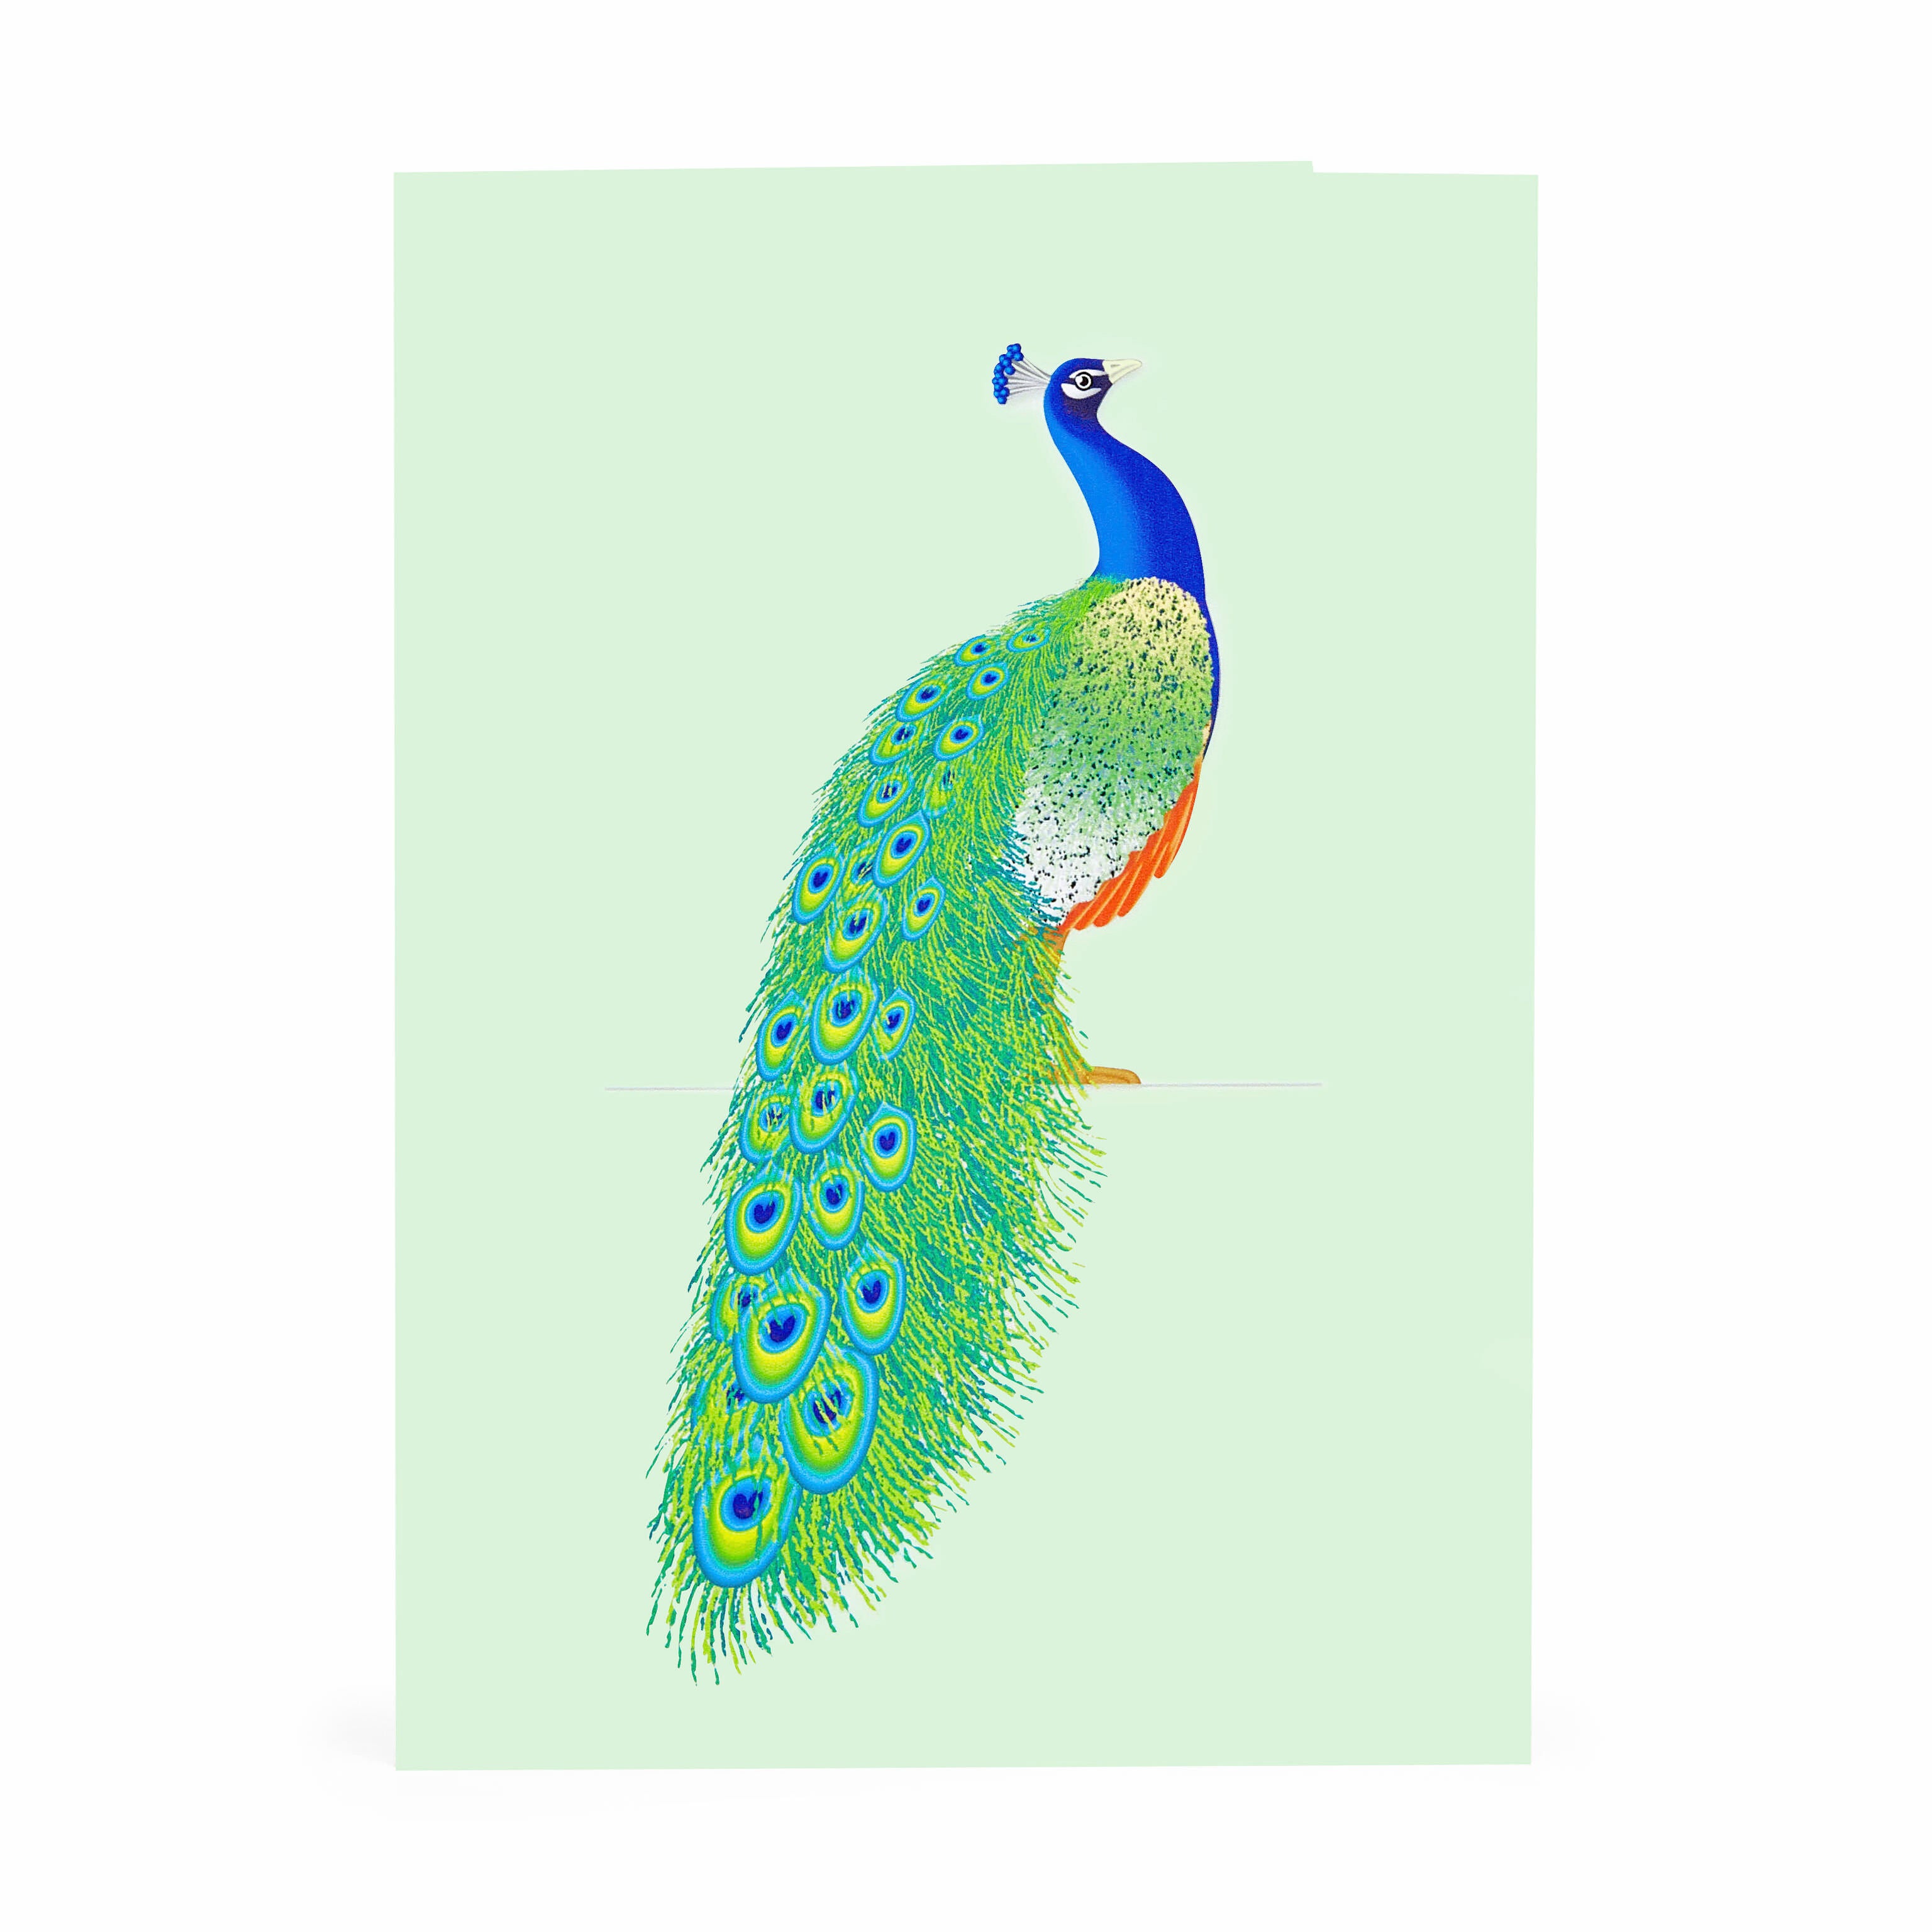 Peacock Note Cards, 4x6 inches, Set of 48